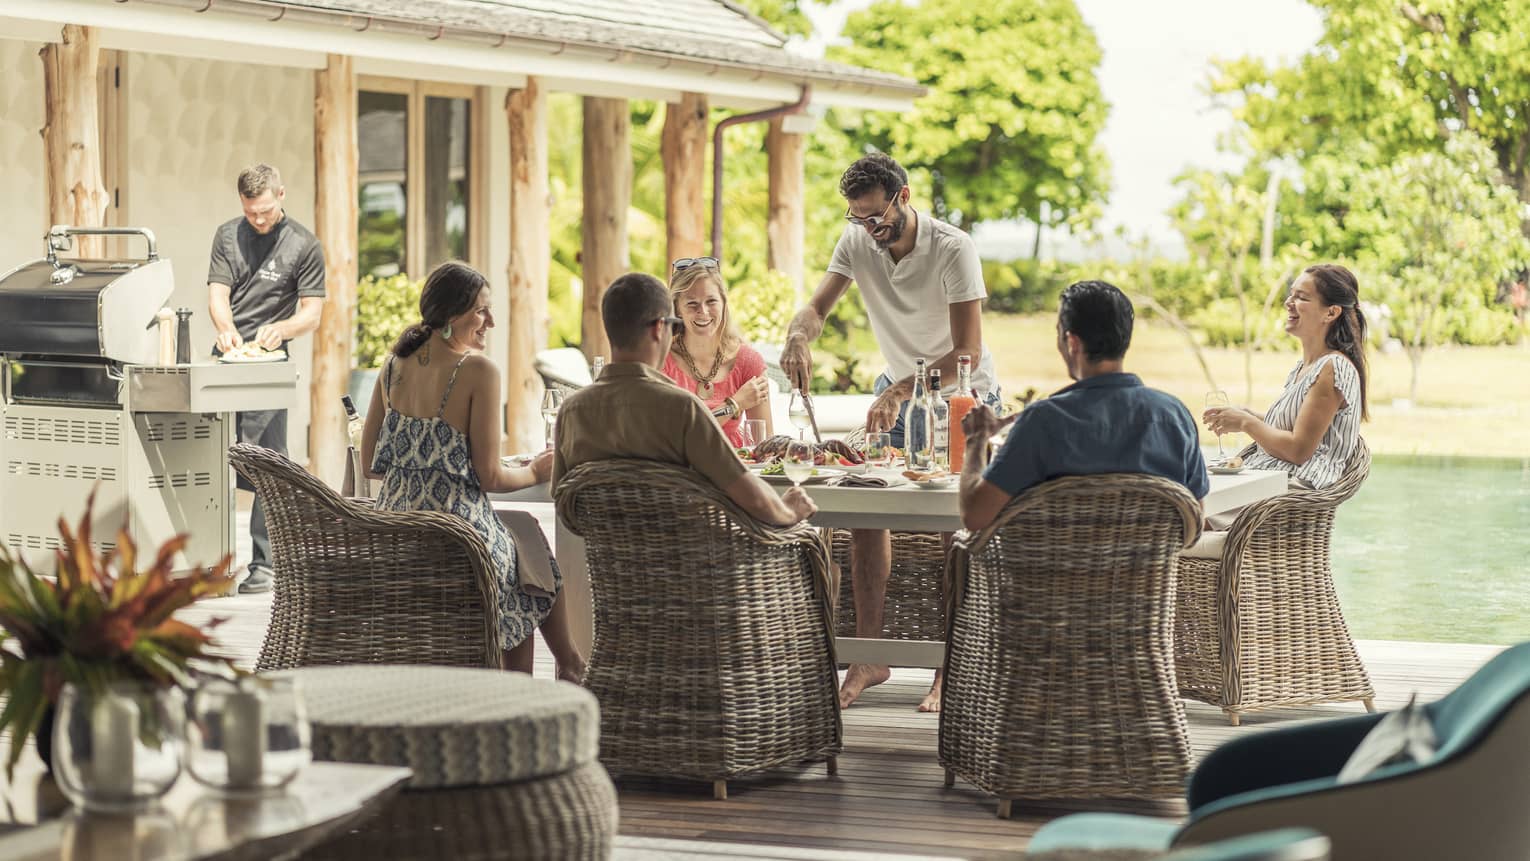 Five people seated poolside with staff member service and chef at grill